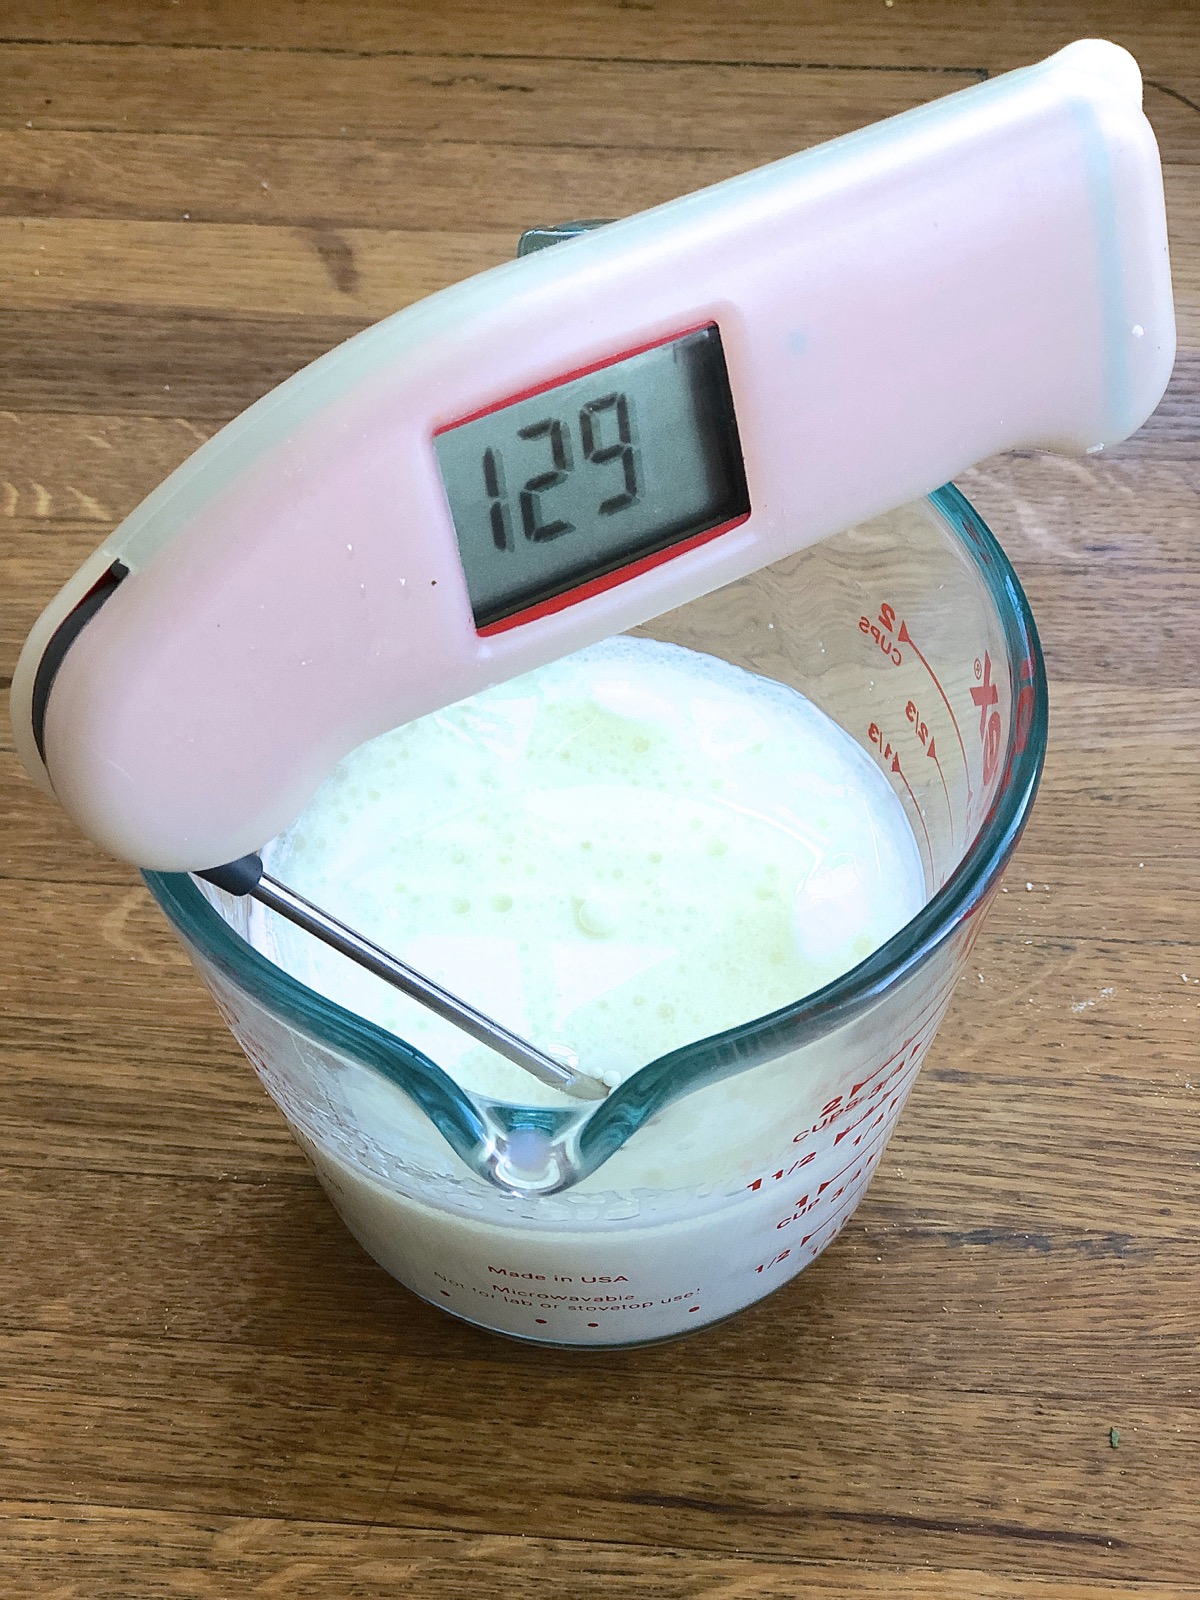 Thermometer in measuring cup of warm milk, showing temperature of 129°F.